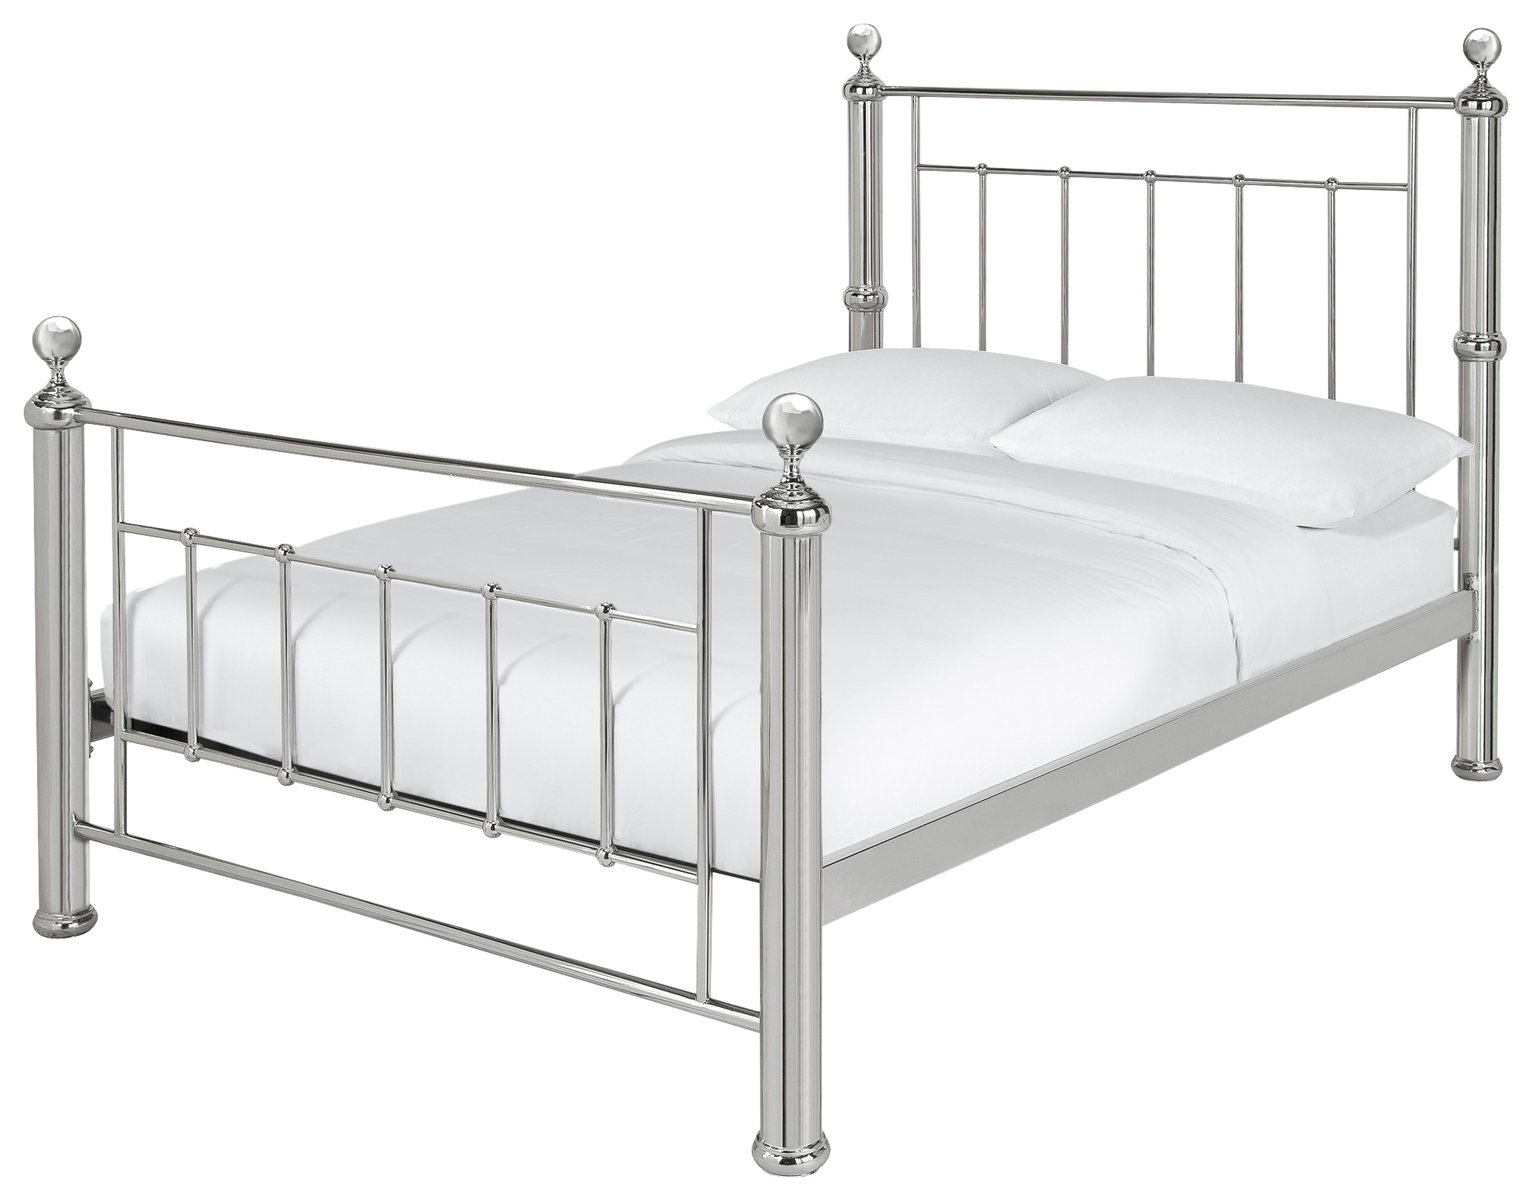 Argos Home Mayfair Superking Bed Frame Review